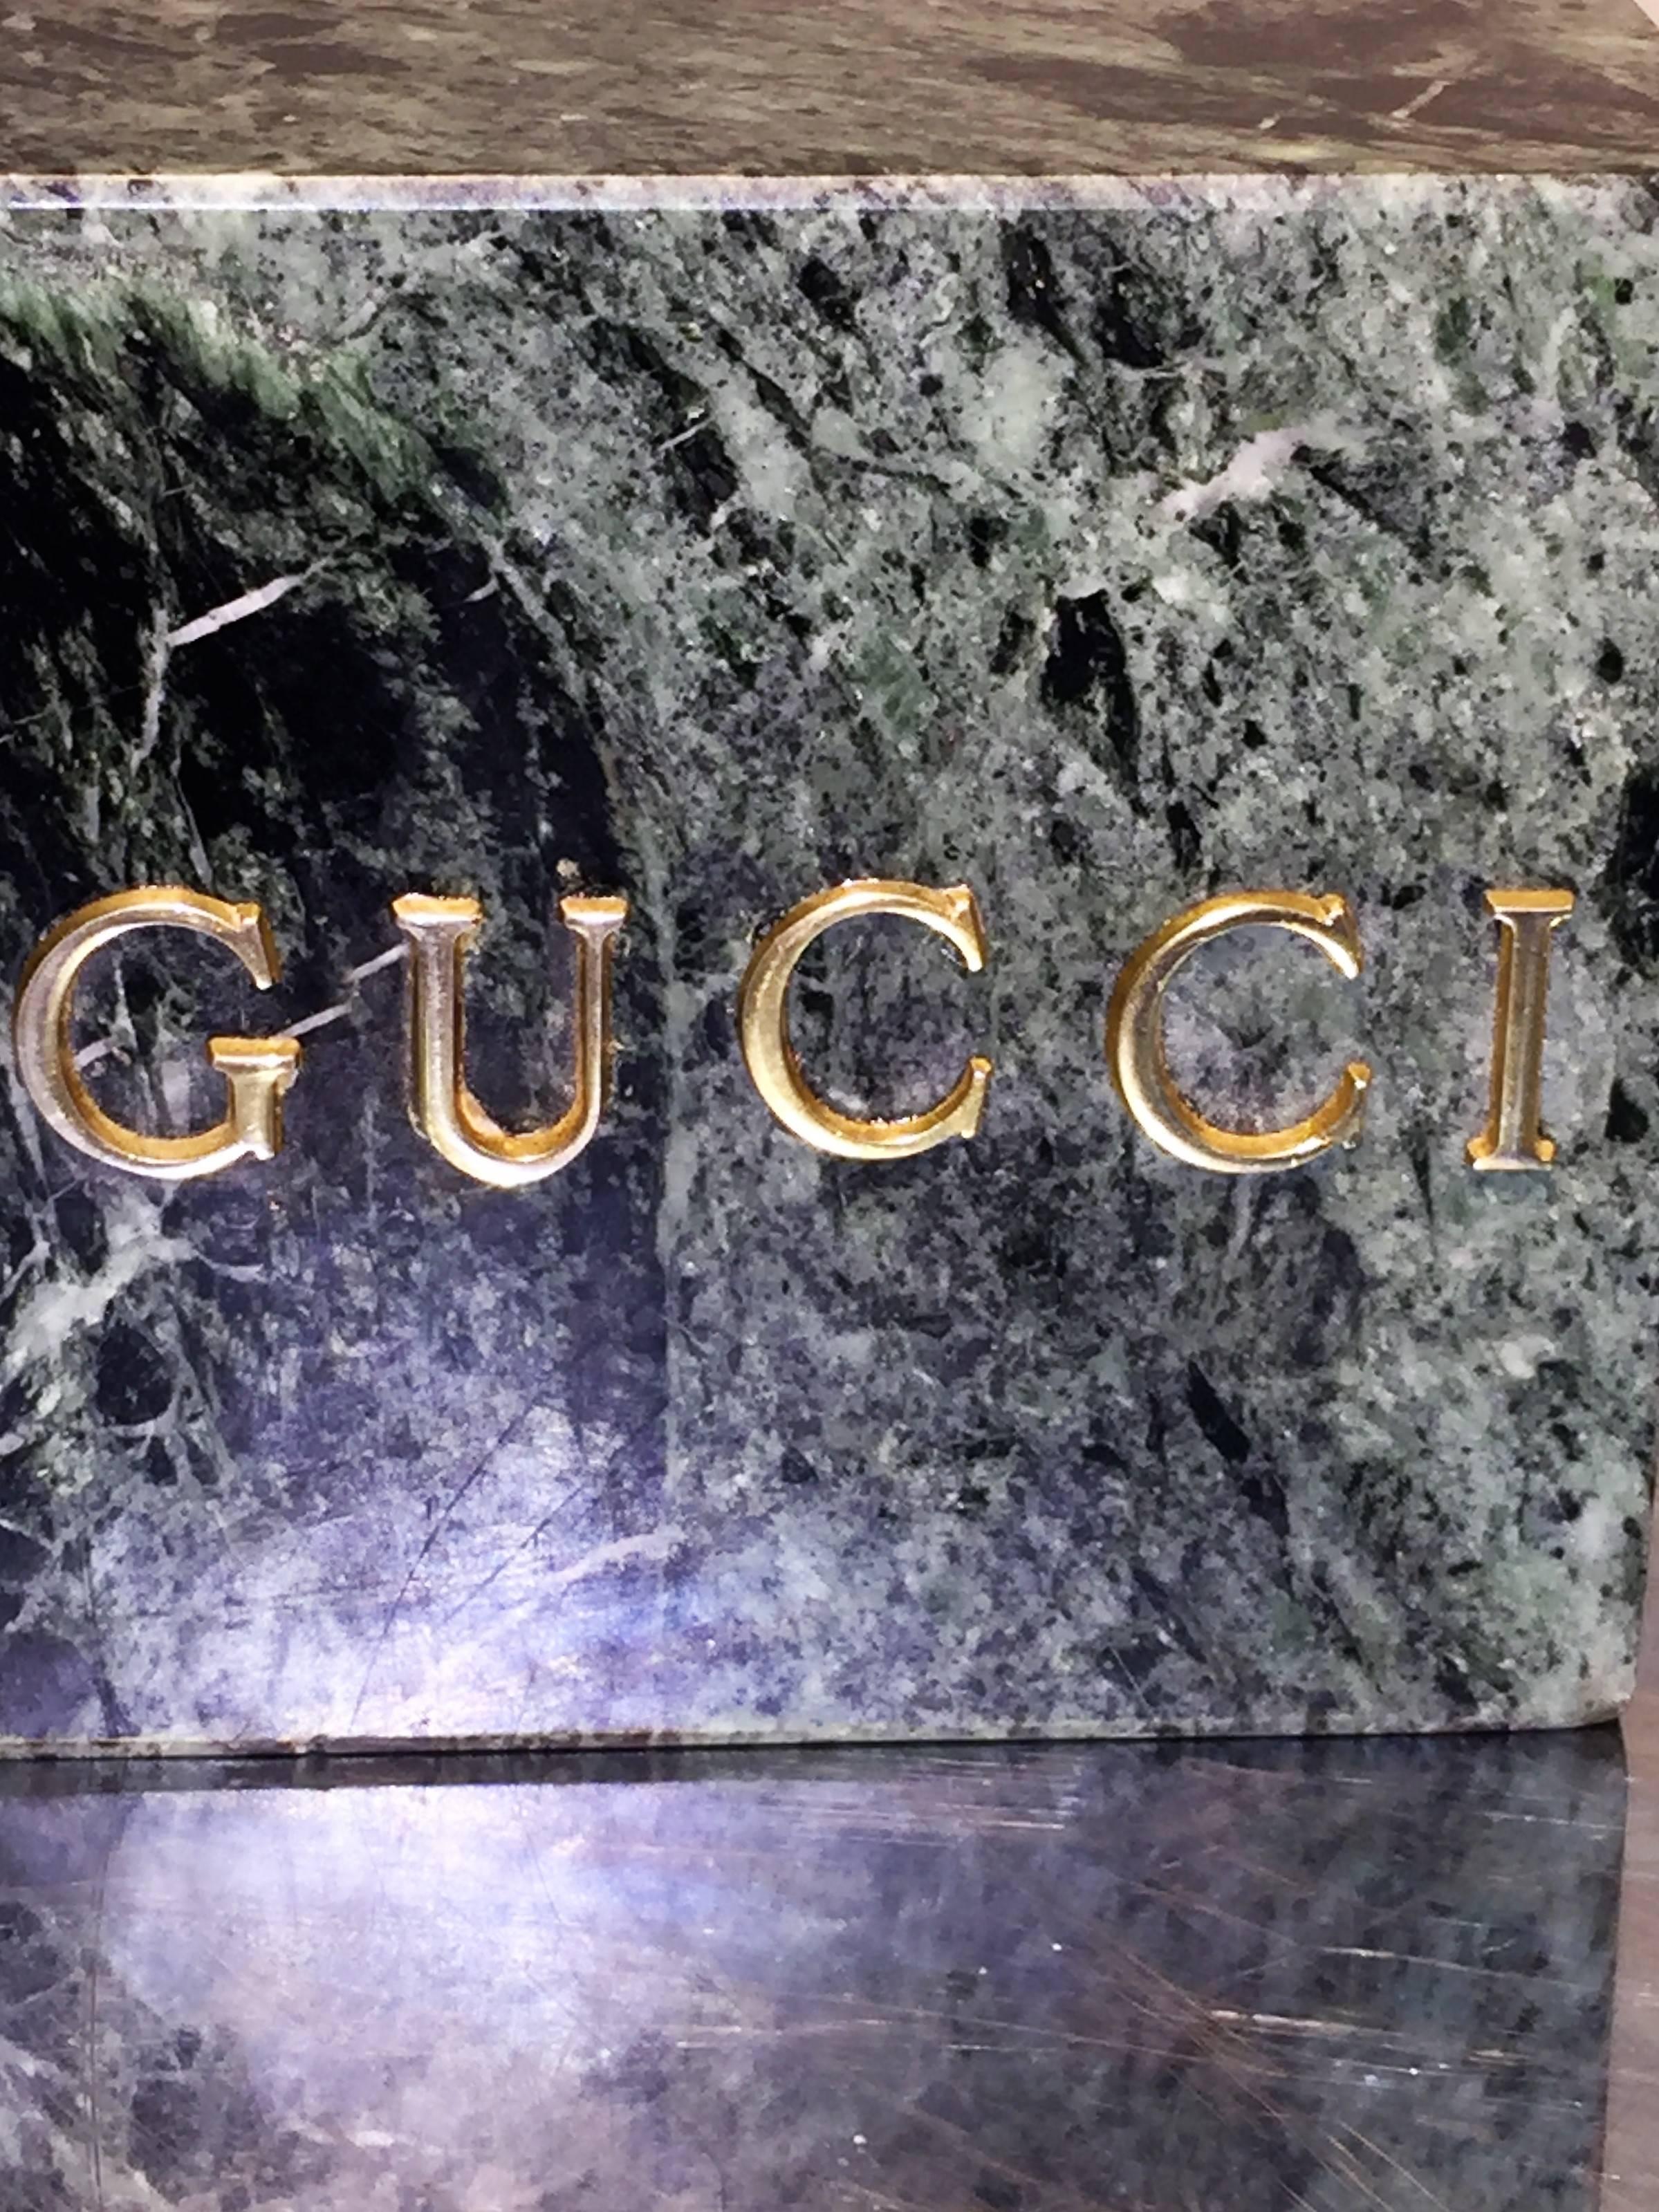 Substantial marble bookends with gilded brass Gucci nameplates. These would be great on a high end modernist desk holding your books of choice or as chic sculptures.